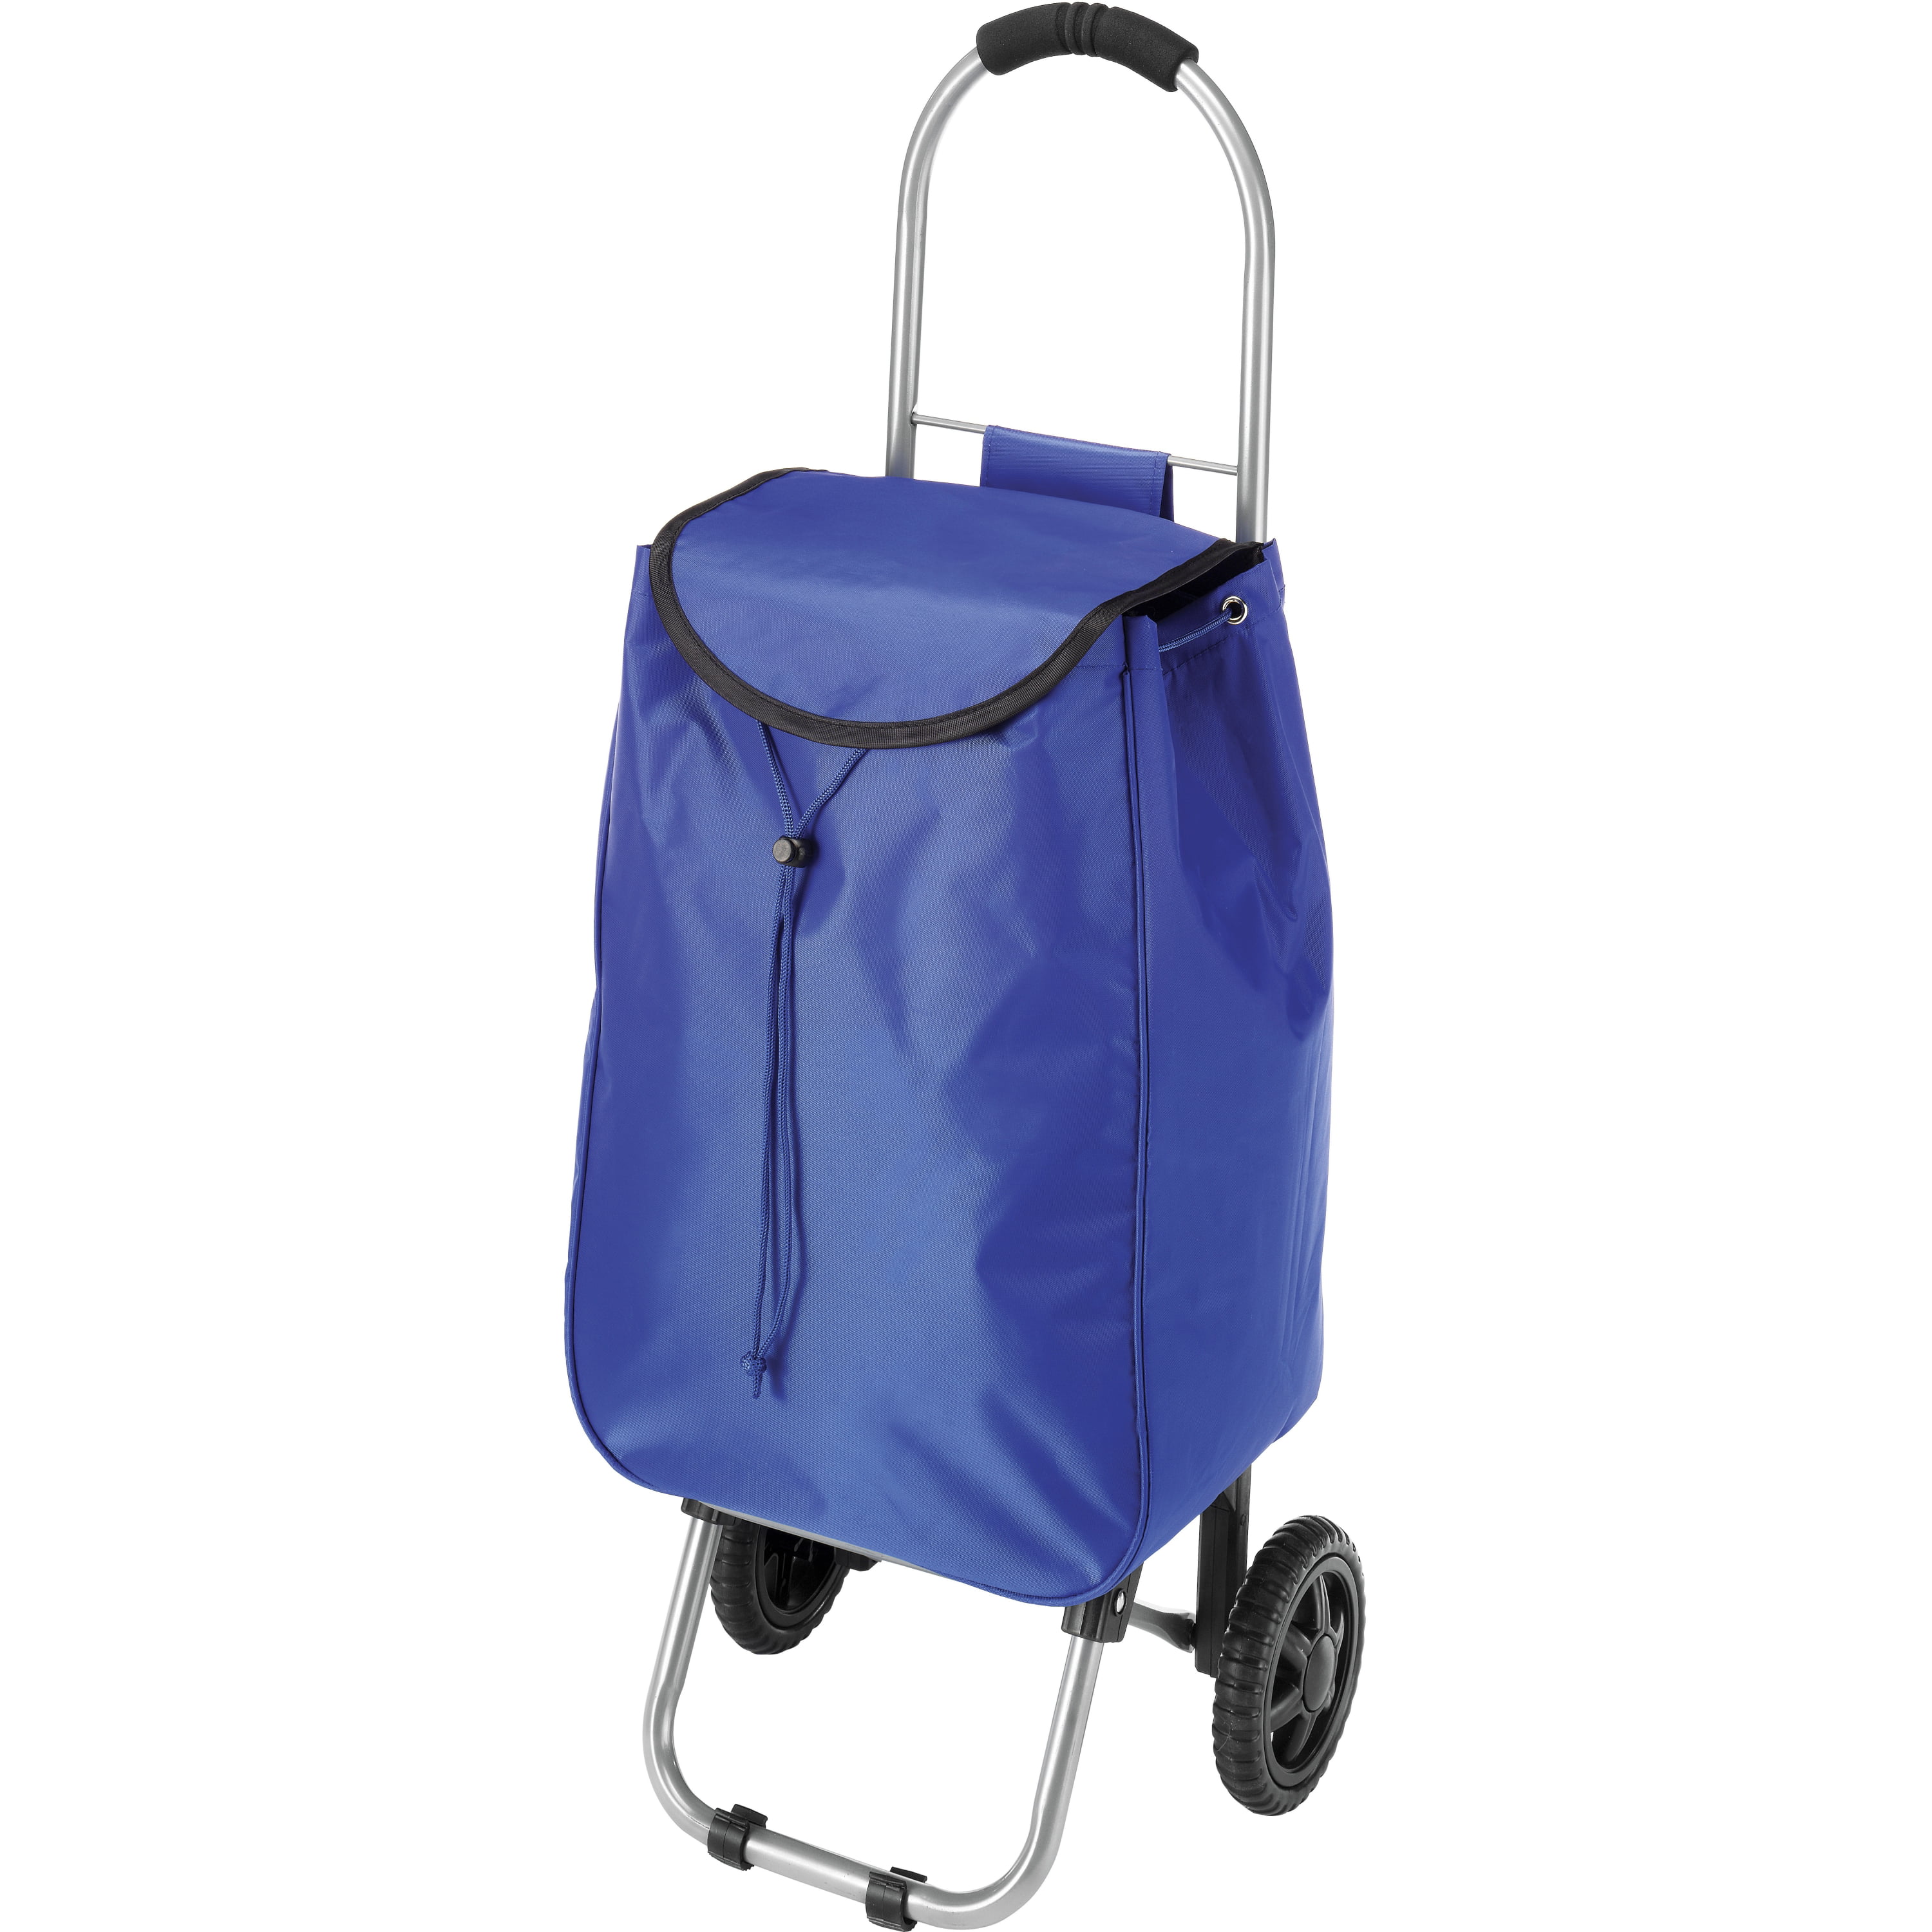 Details about   Small Folding Shopping Organizer Cart With Wheels Bag 